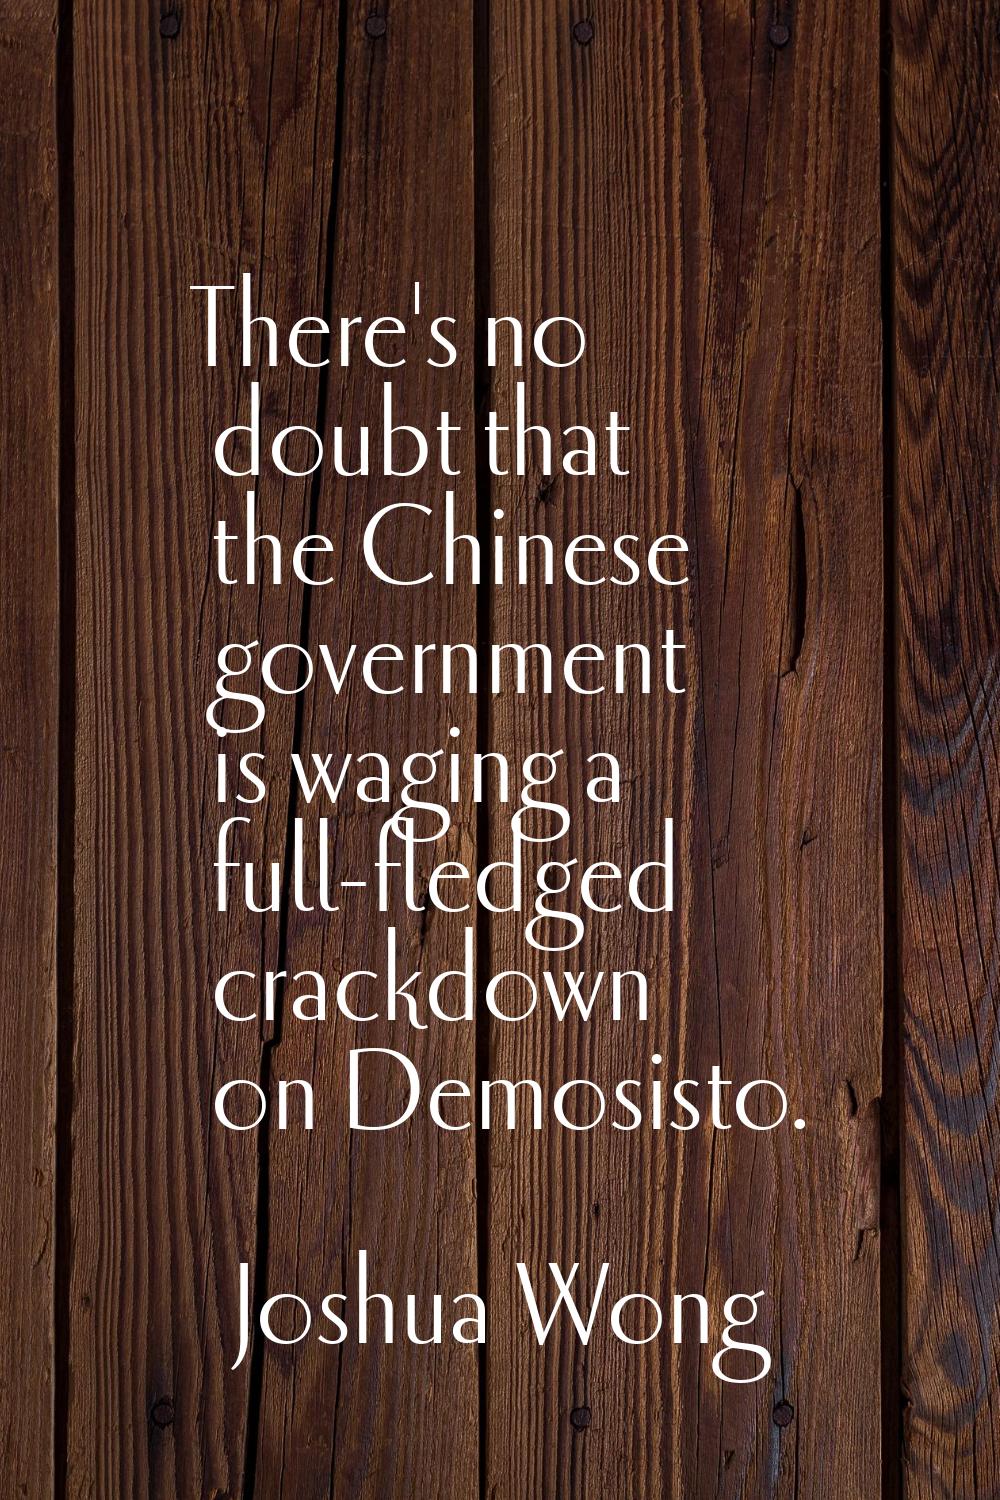 There's no doubt that the Chinese government is waging a full-fledged crackdown on Demosisto.